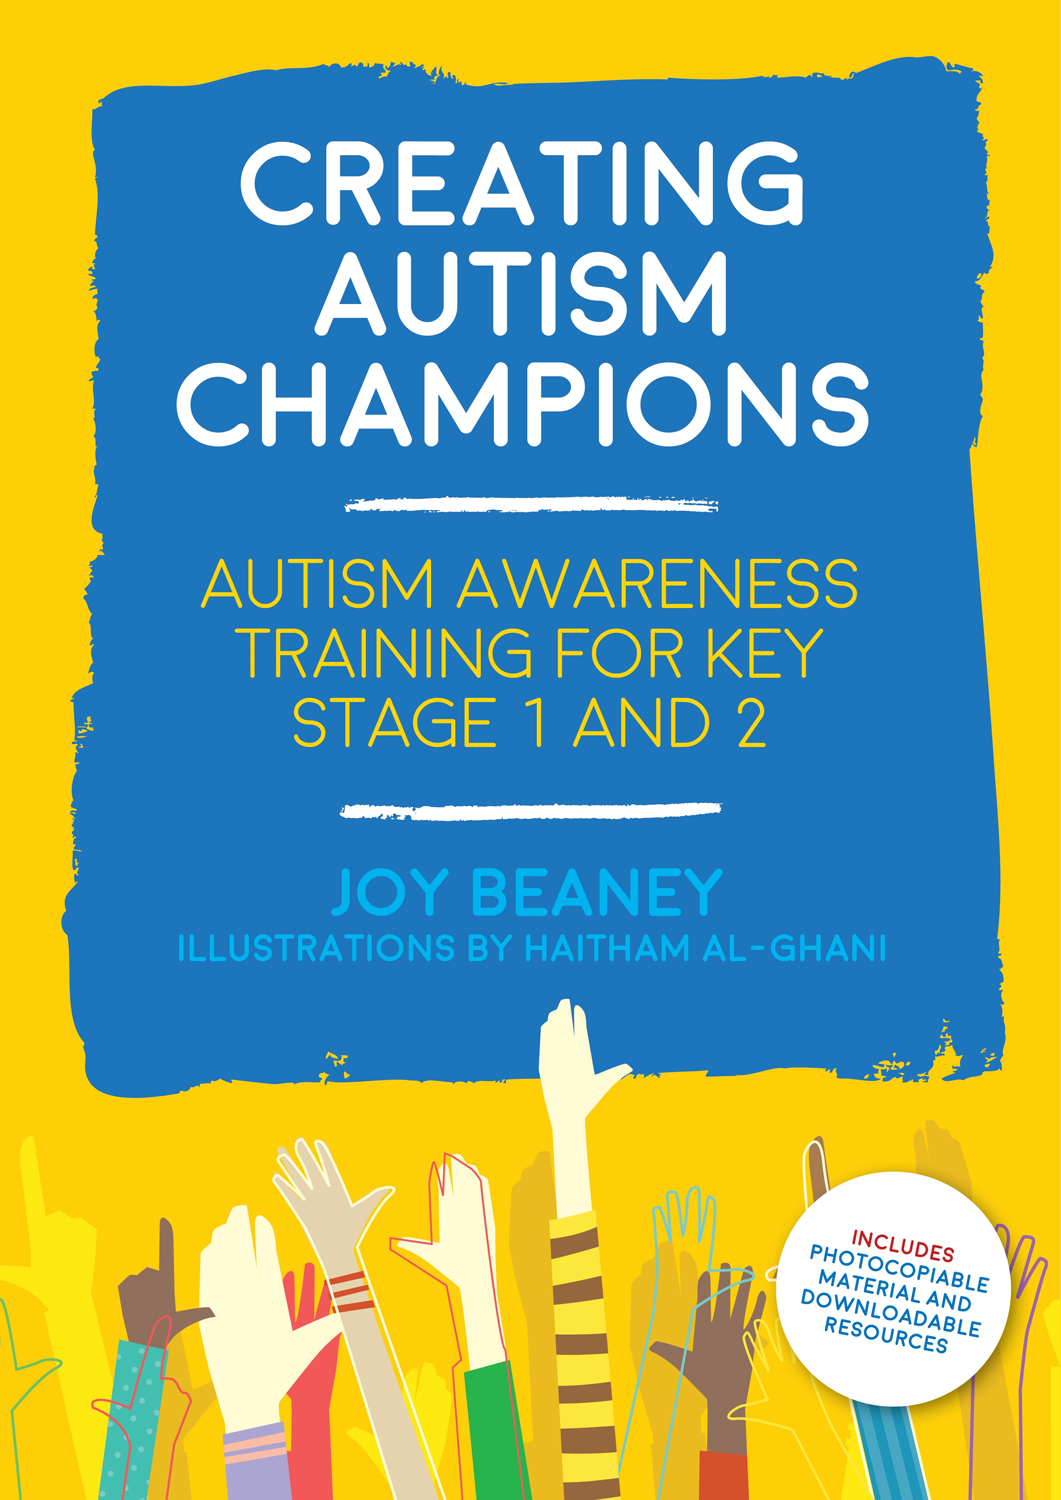 CREATING AUTISM CHAMPIONS AUTISM AWARENESS TRAINING FOR KEY STAGE 1 AND 2 - photo 1